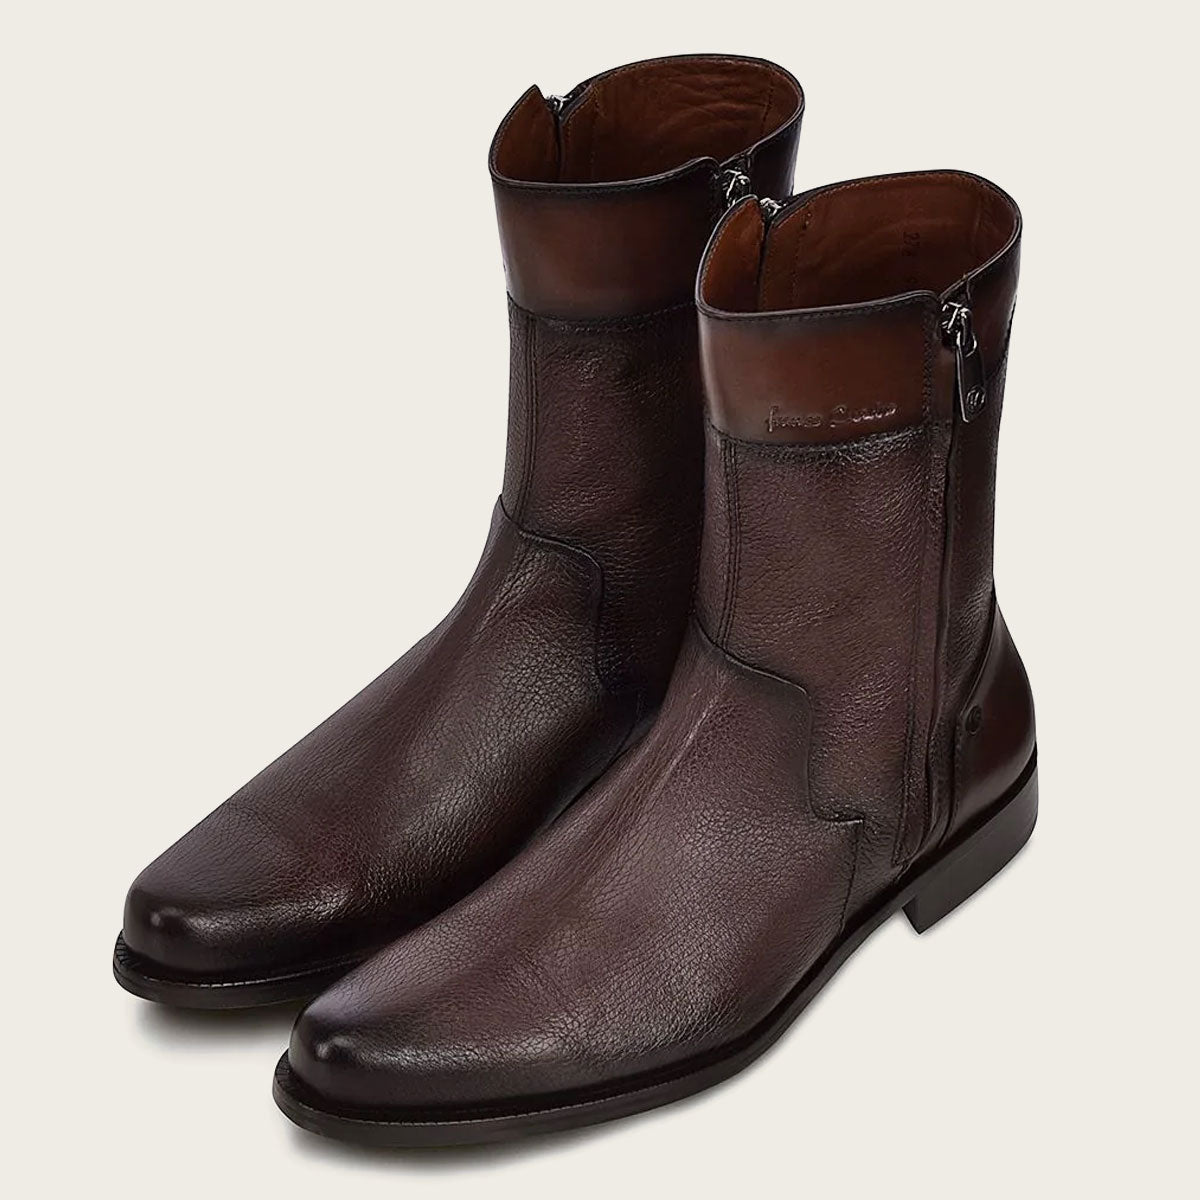 Hand-painted dark brown leather boot - a unique and stylish addition to your footwear collection